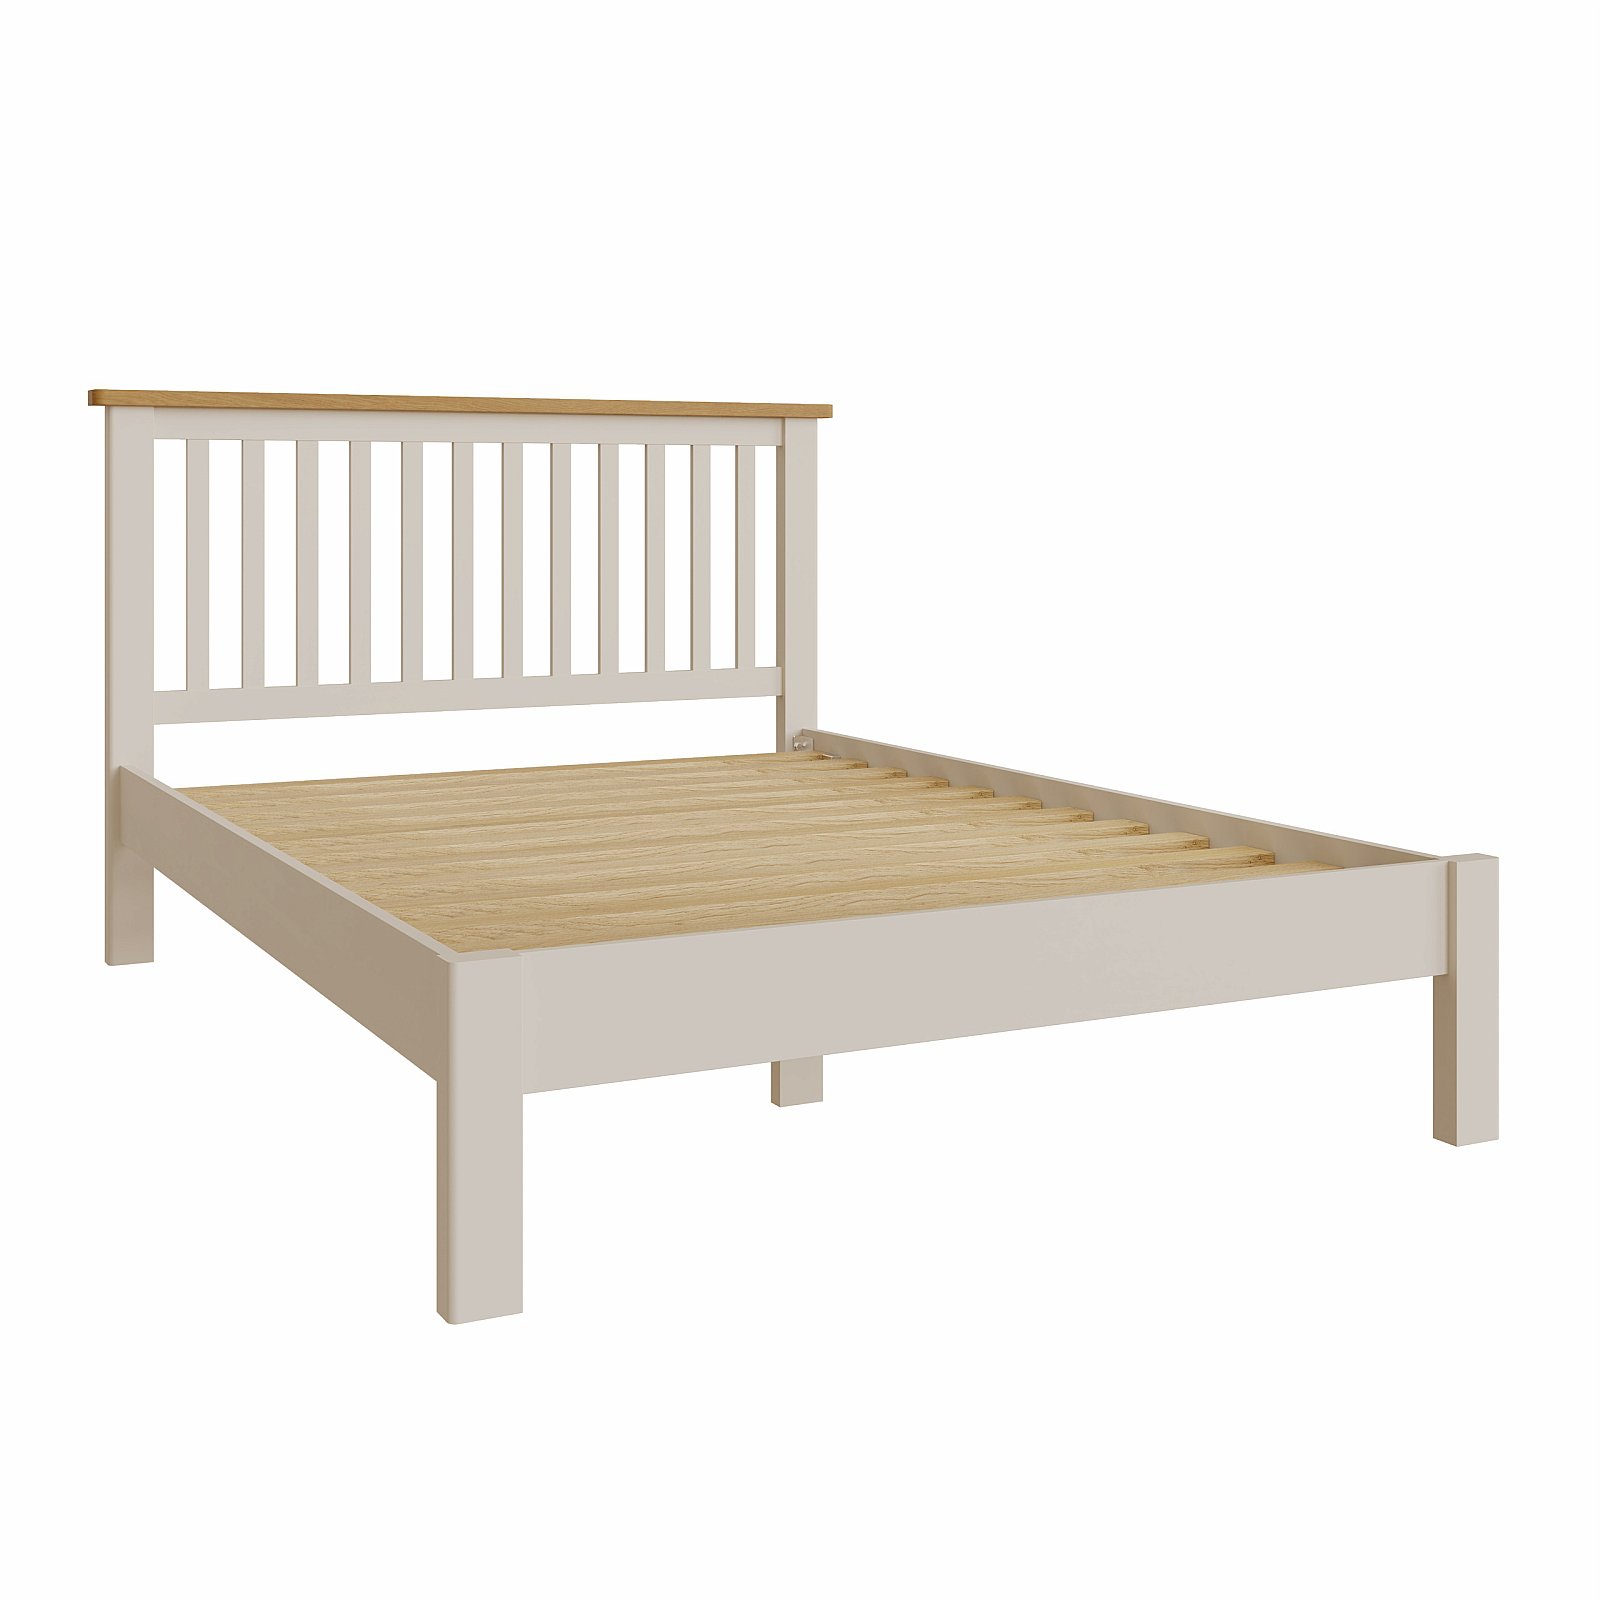 Kingsley Truffle 135cm Double Bed Frame, Truffle Color Bed Frame